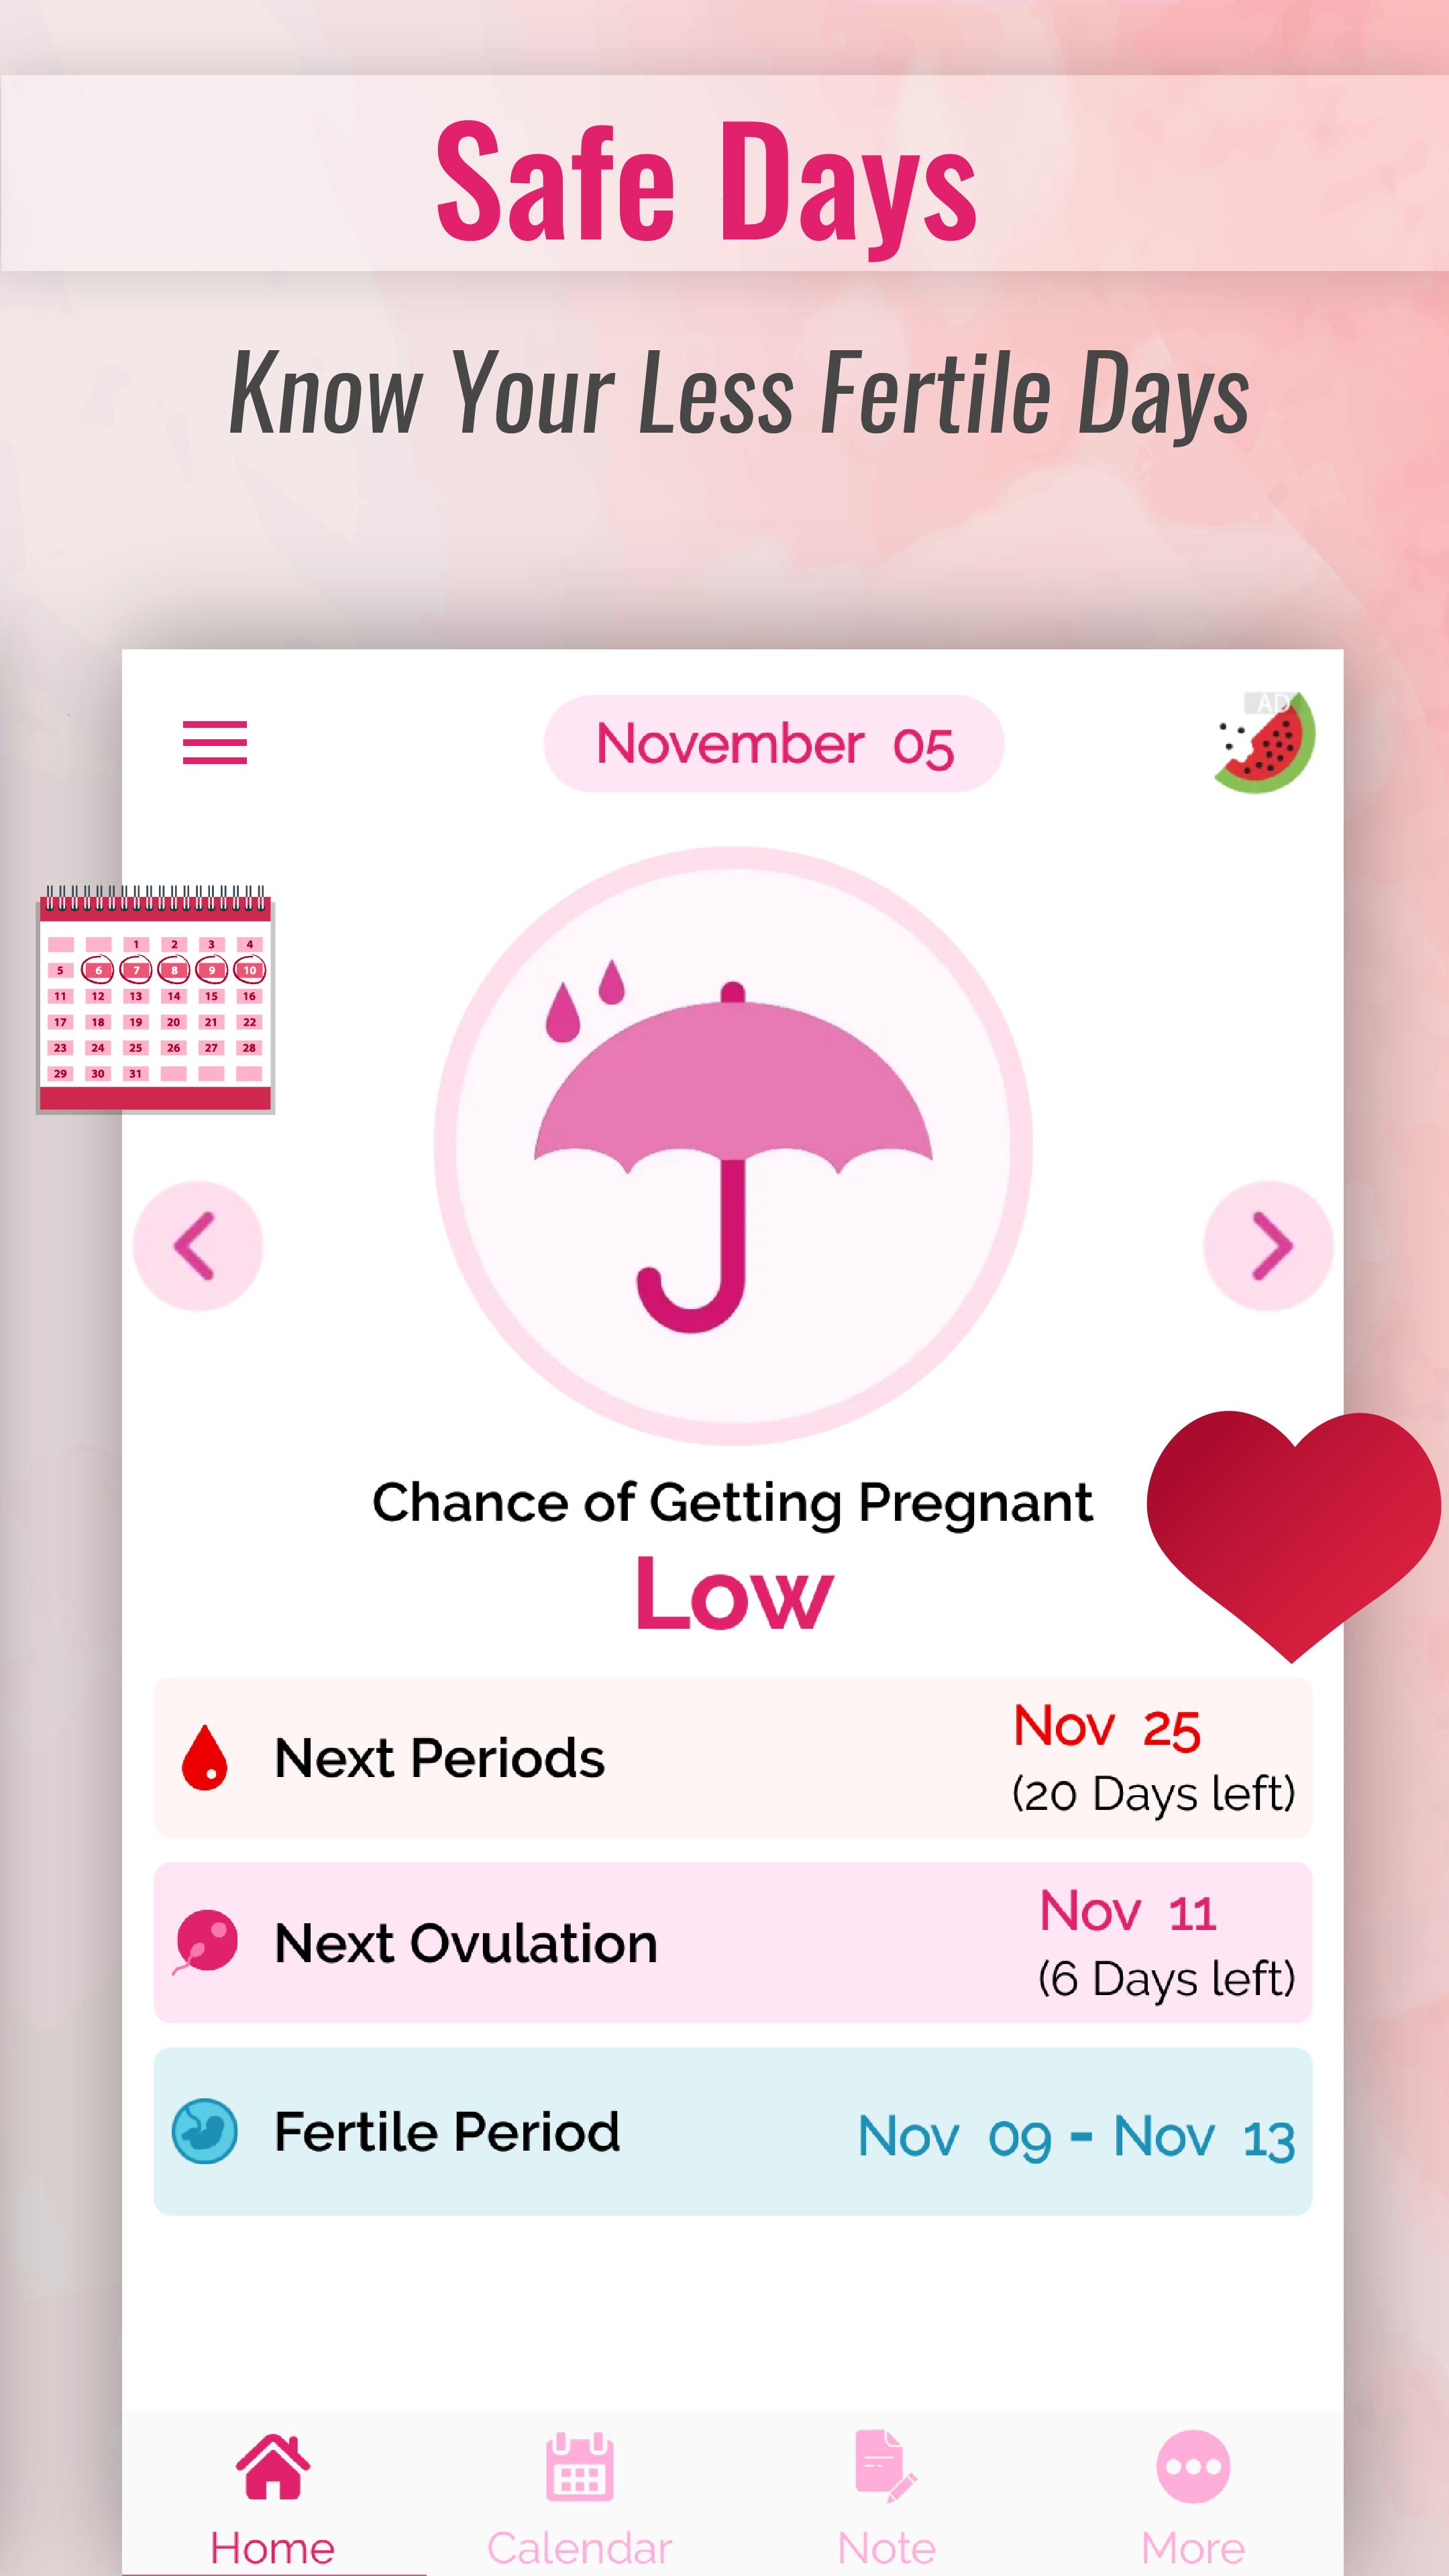 Ovulation Calculator for Android - APK Download